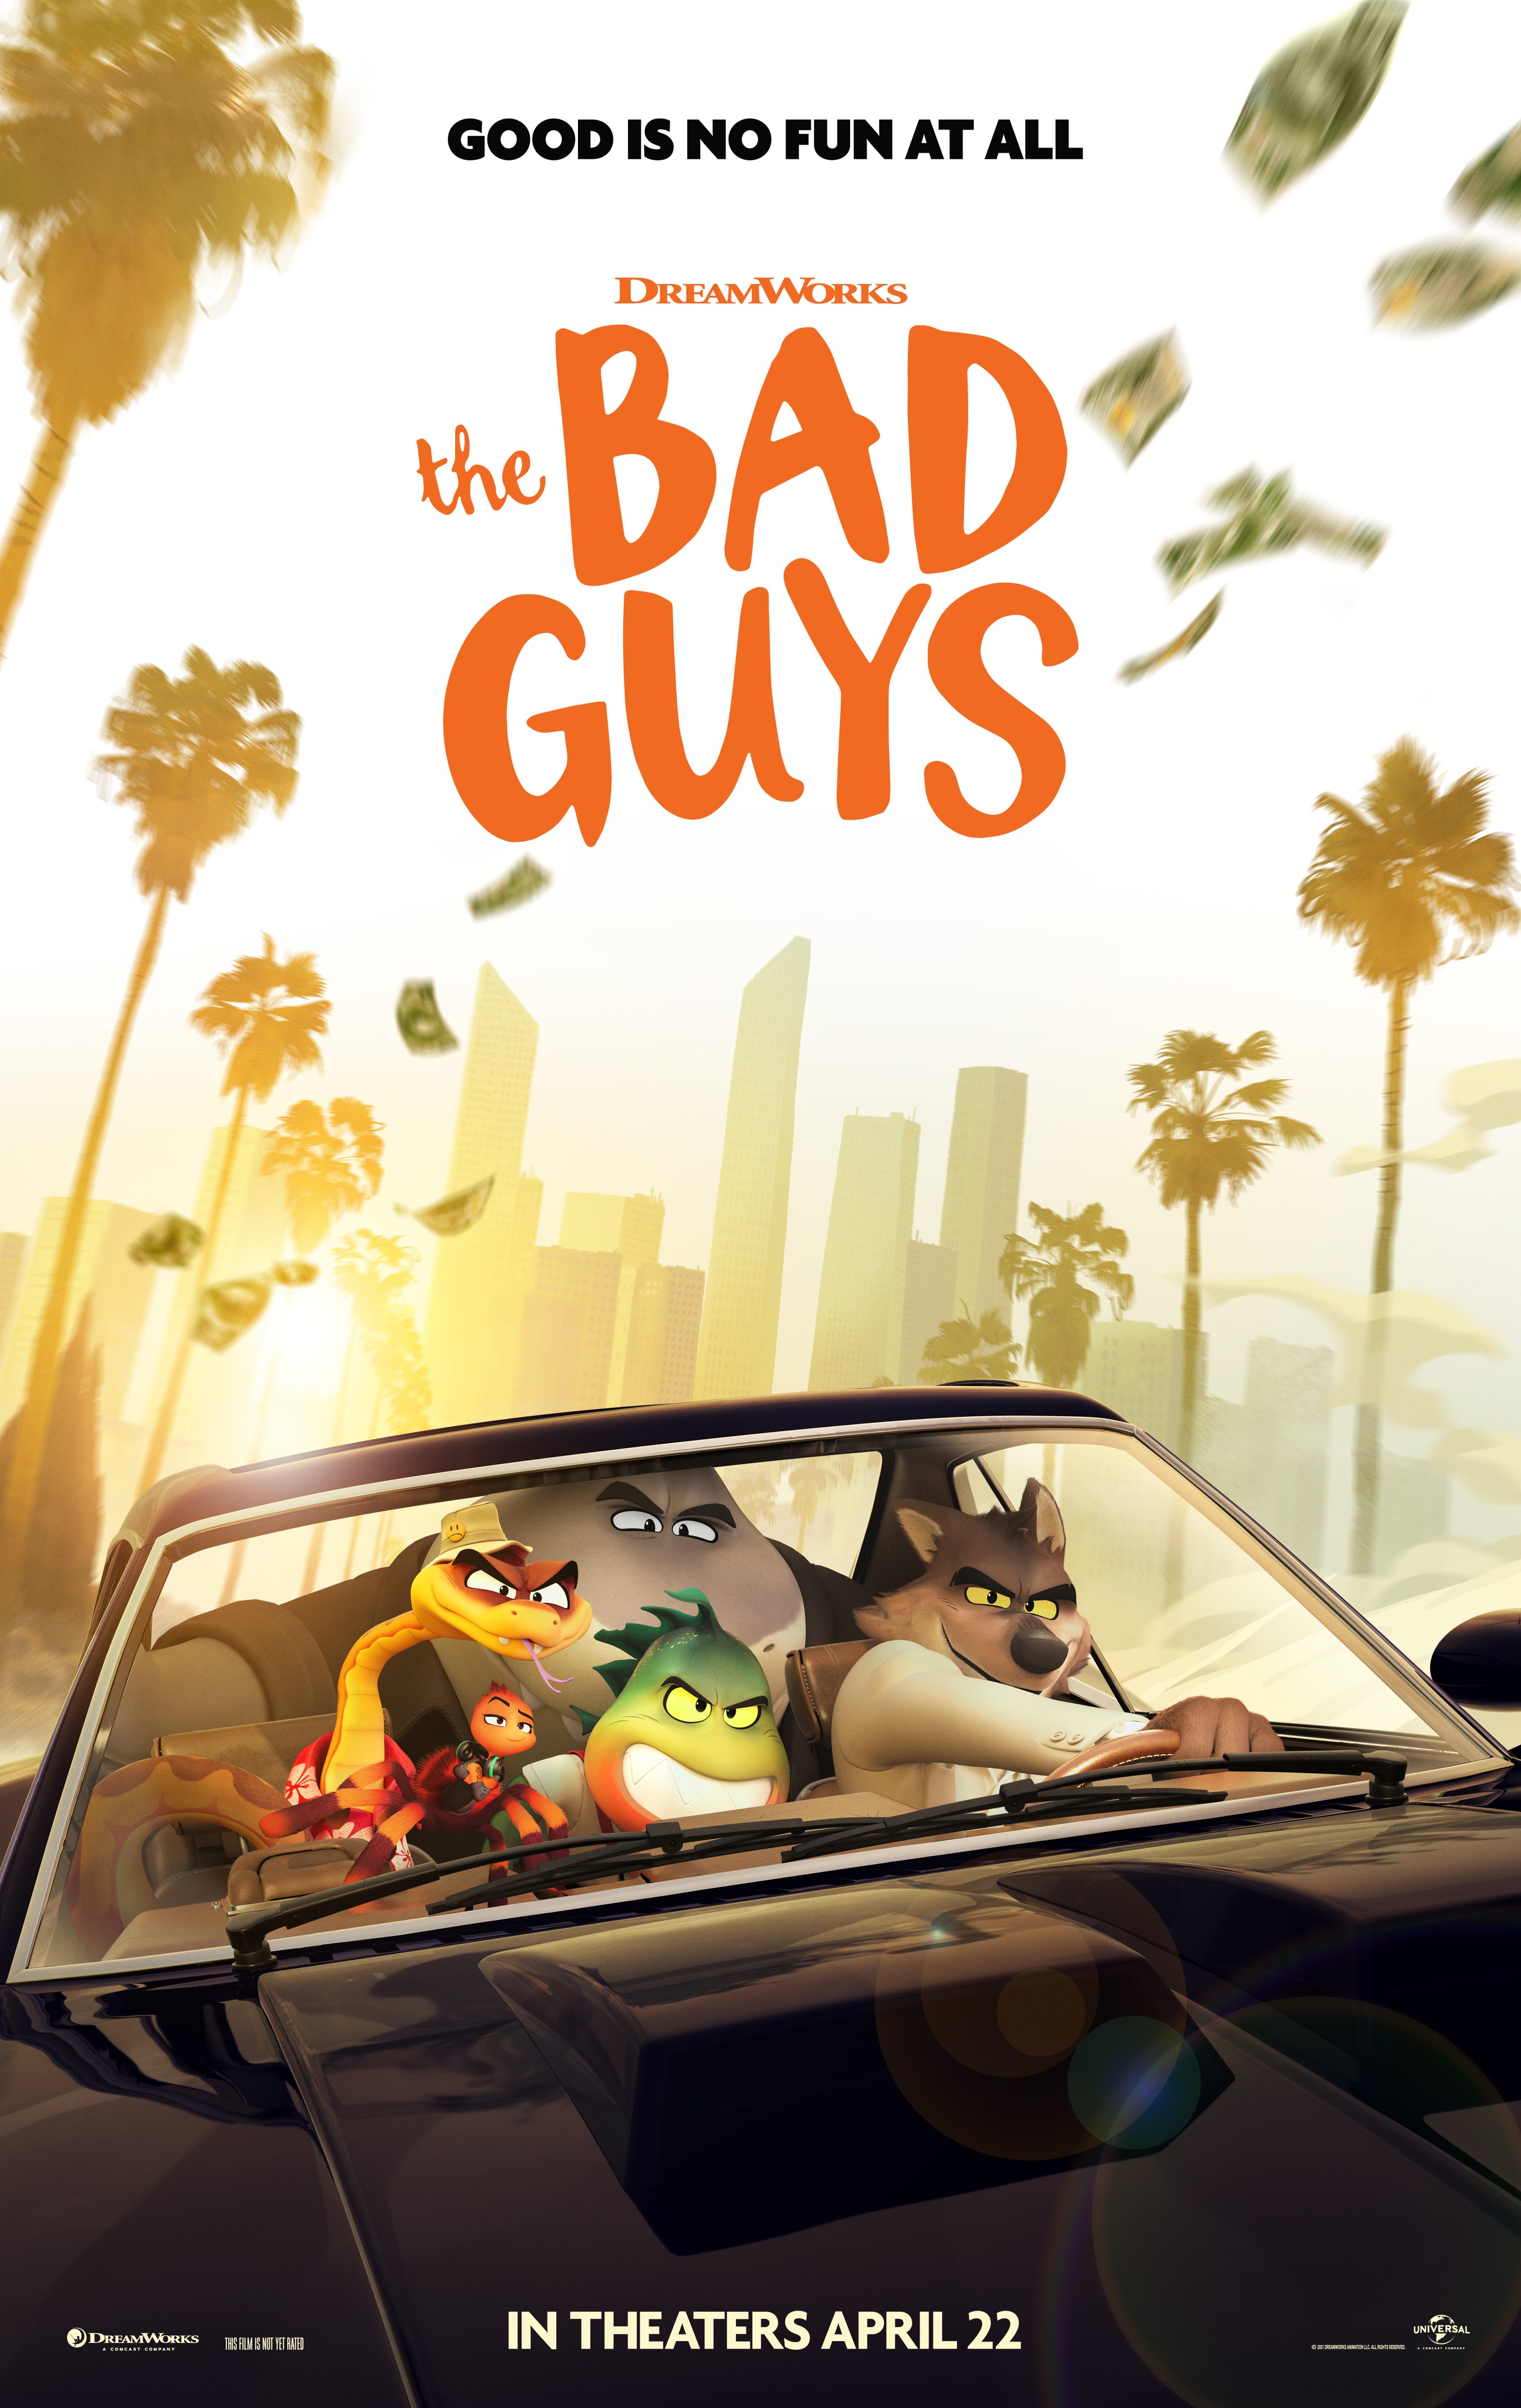 The Bad Guys' is #1 on Netflix — but is it any good?